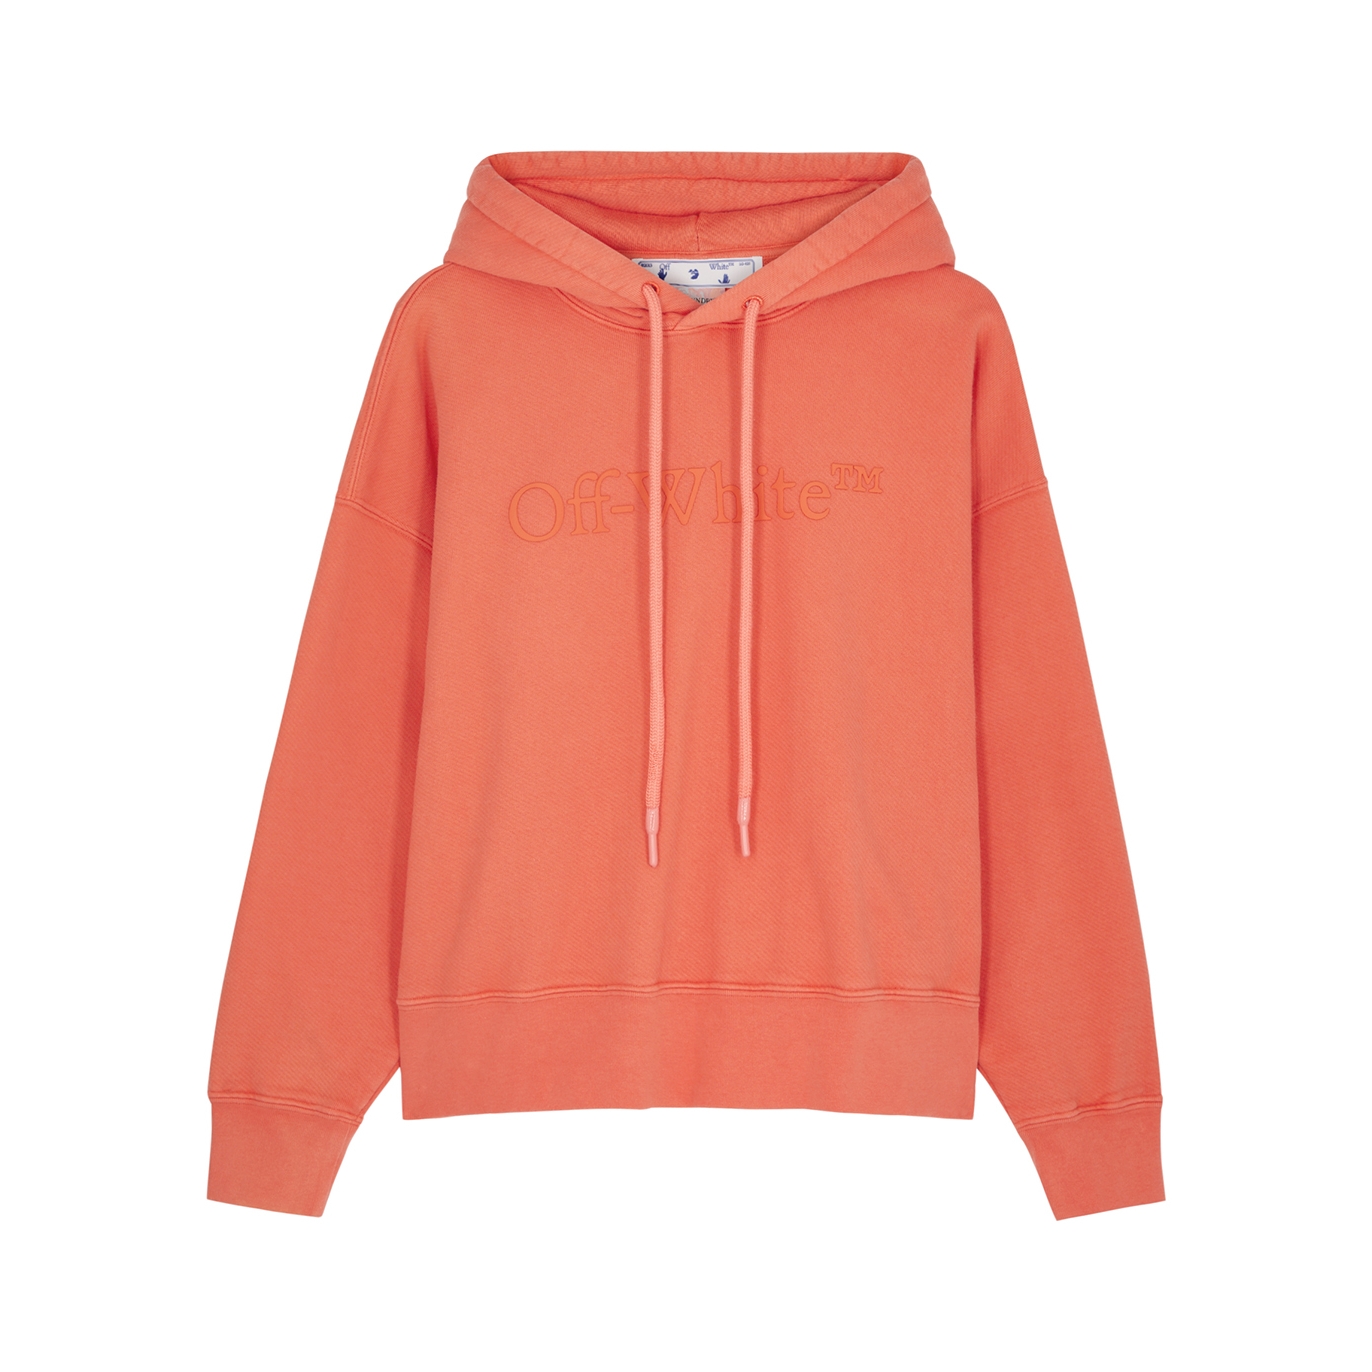 Off-White Laundry Logo Hooded Cotton Sweatshirt - Coral - XL